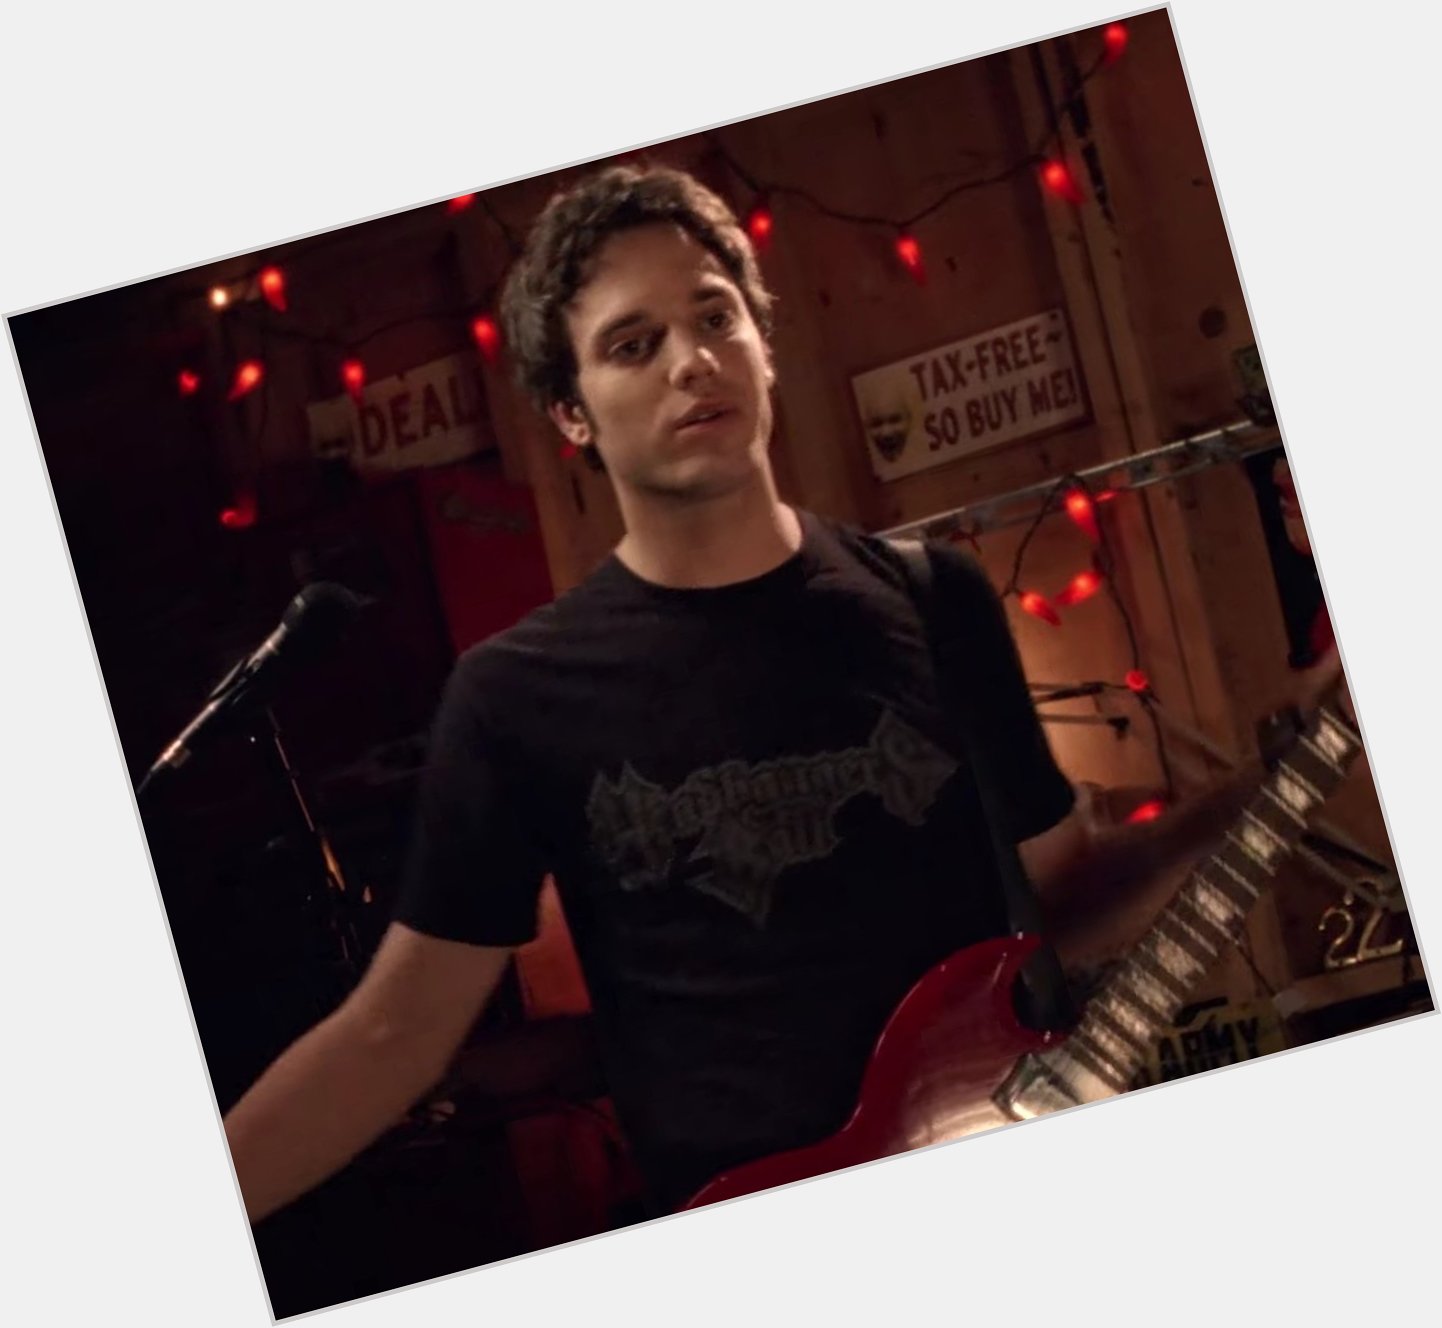 Happy birthday, to the bae of all baes, jake epstein <3 